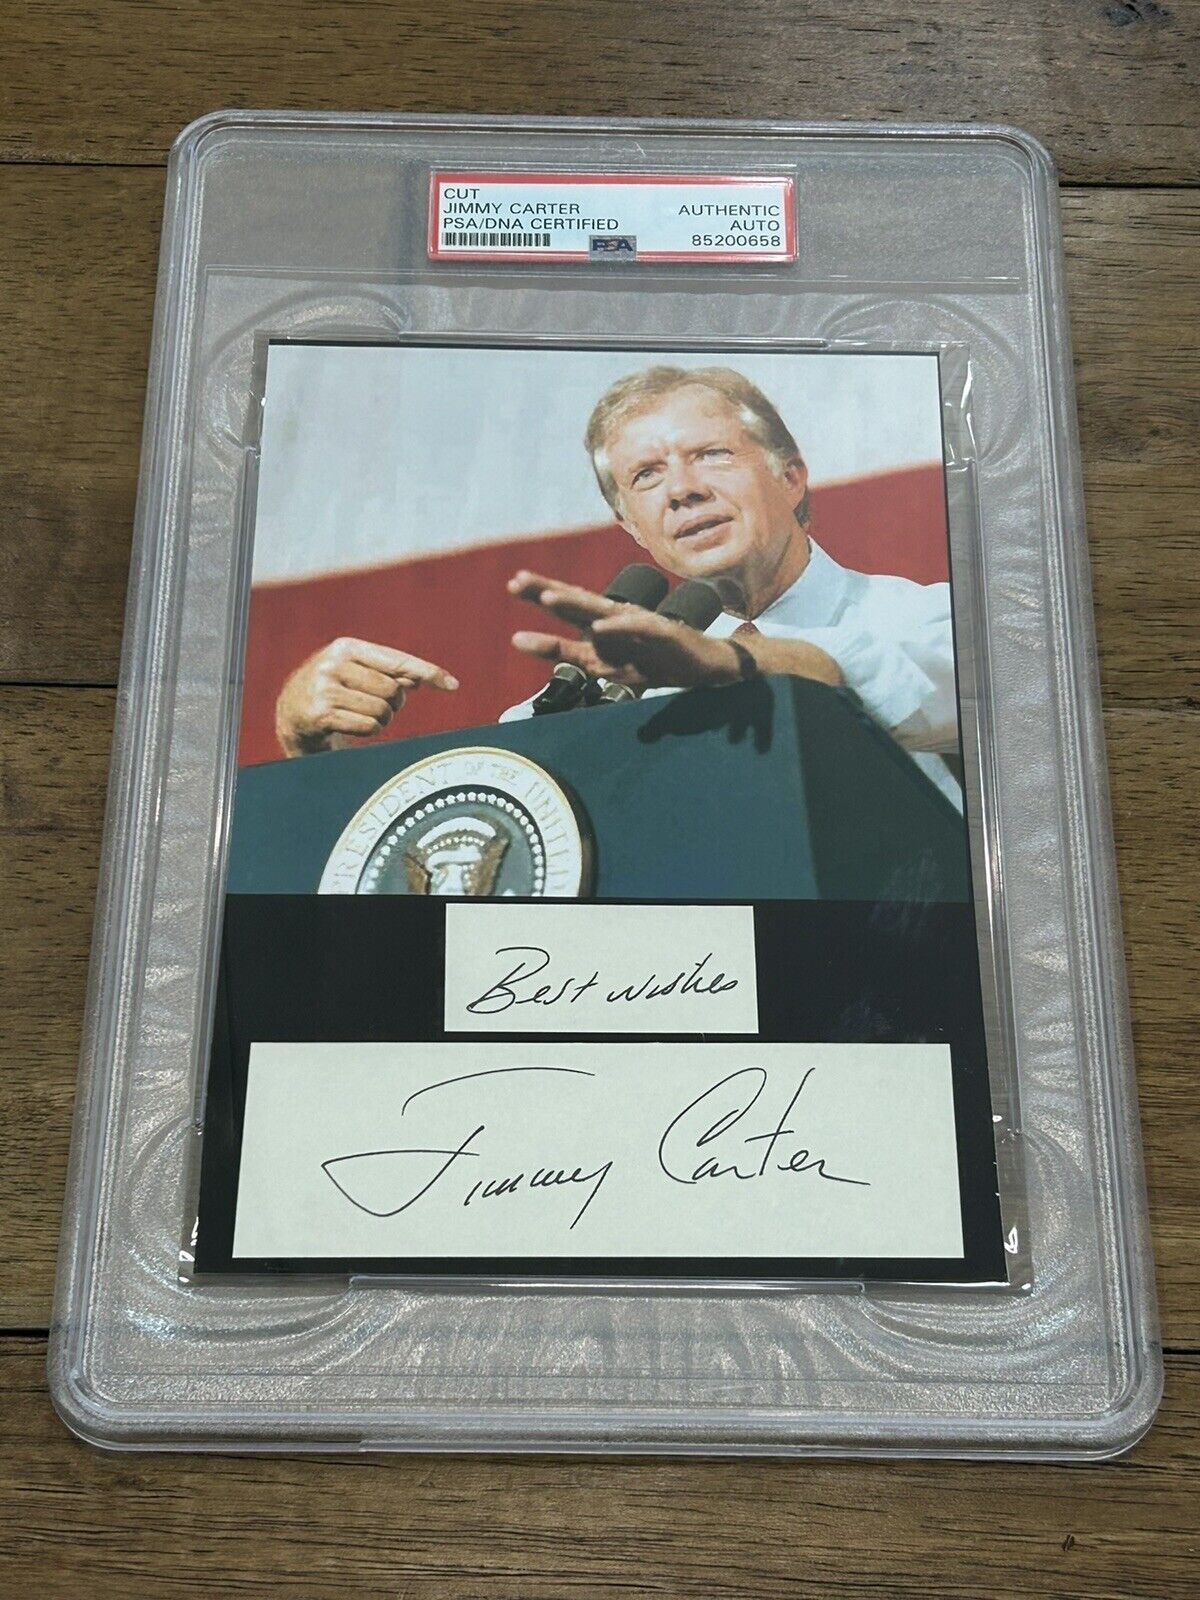 President Jimmy Carter signed full name autograph - PSA DNA certified w/ photo 2